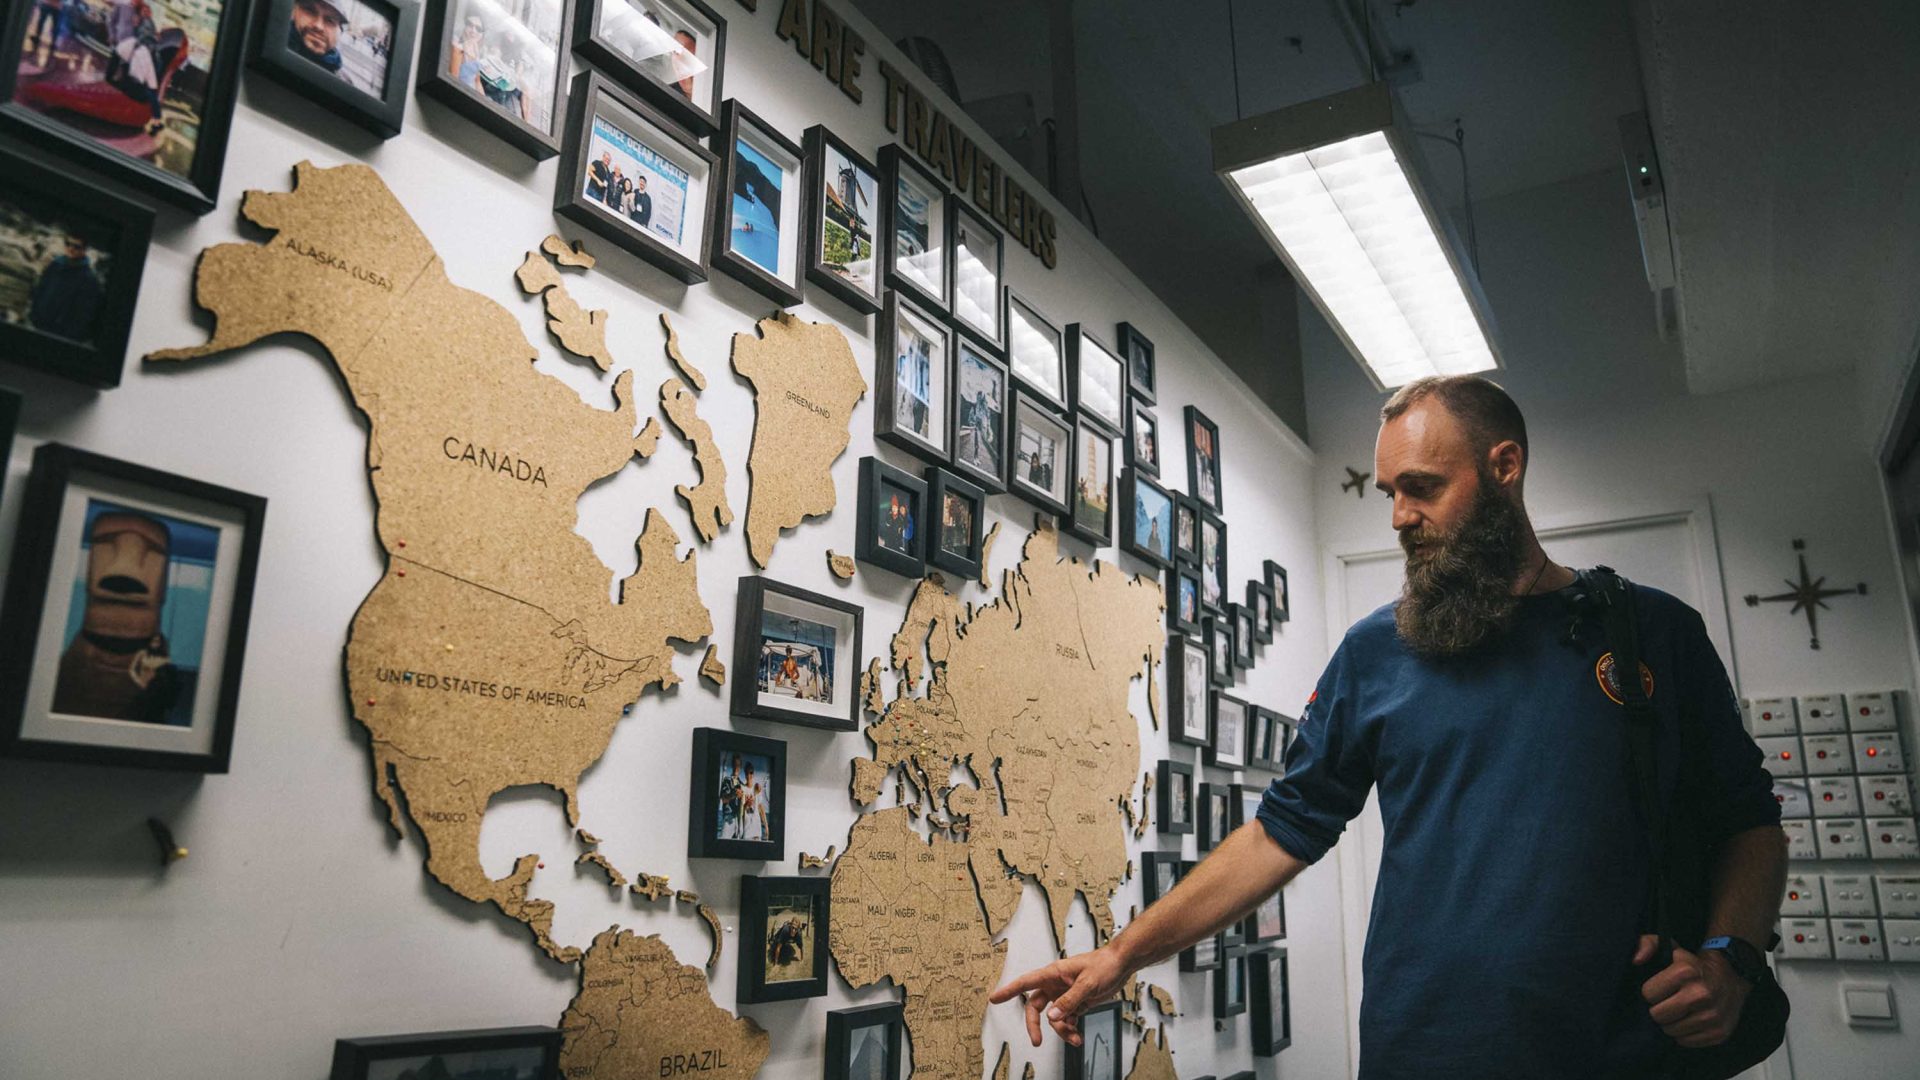 Thor points to a map of the world which is on the wall, indicating a country he has been to.